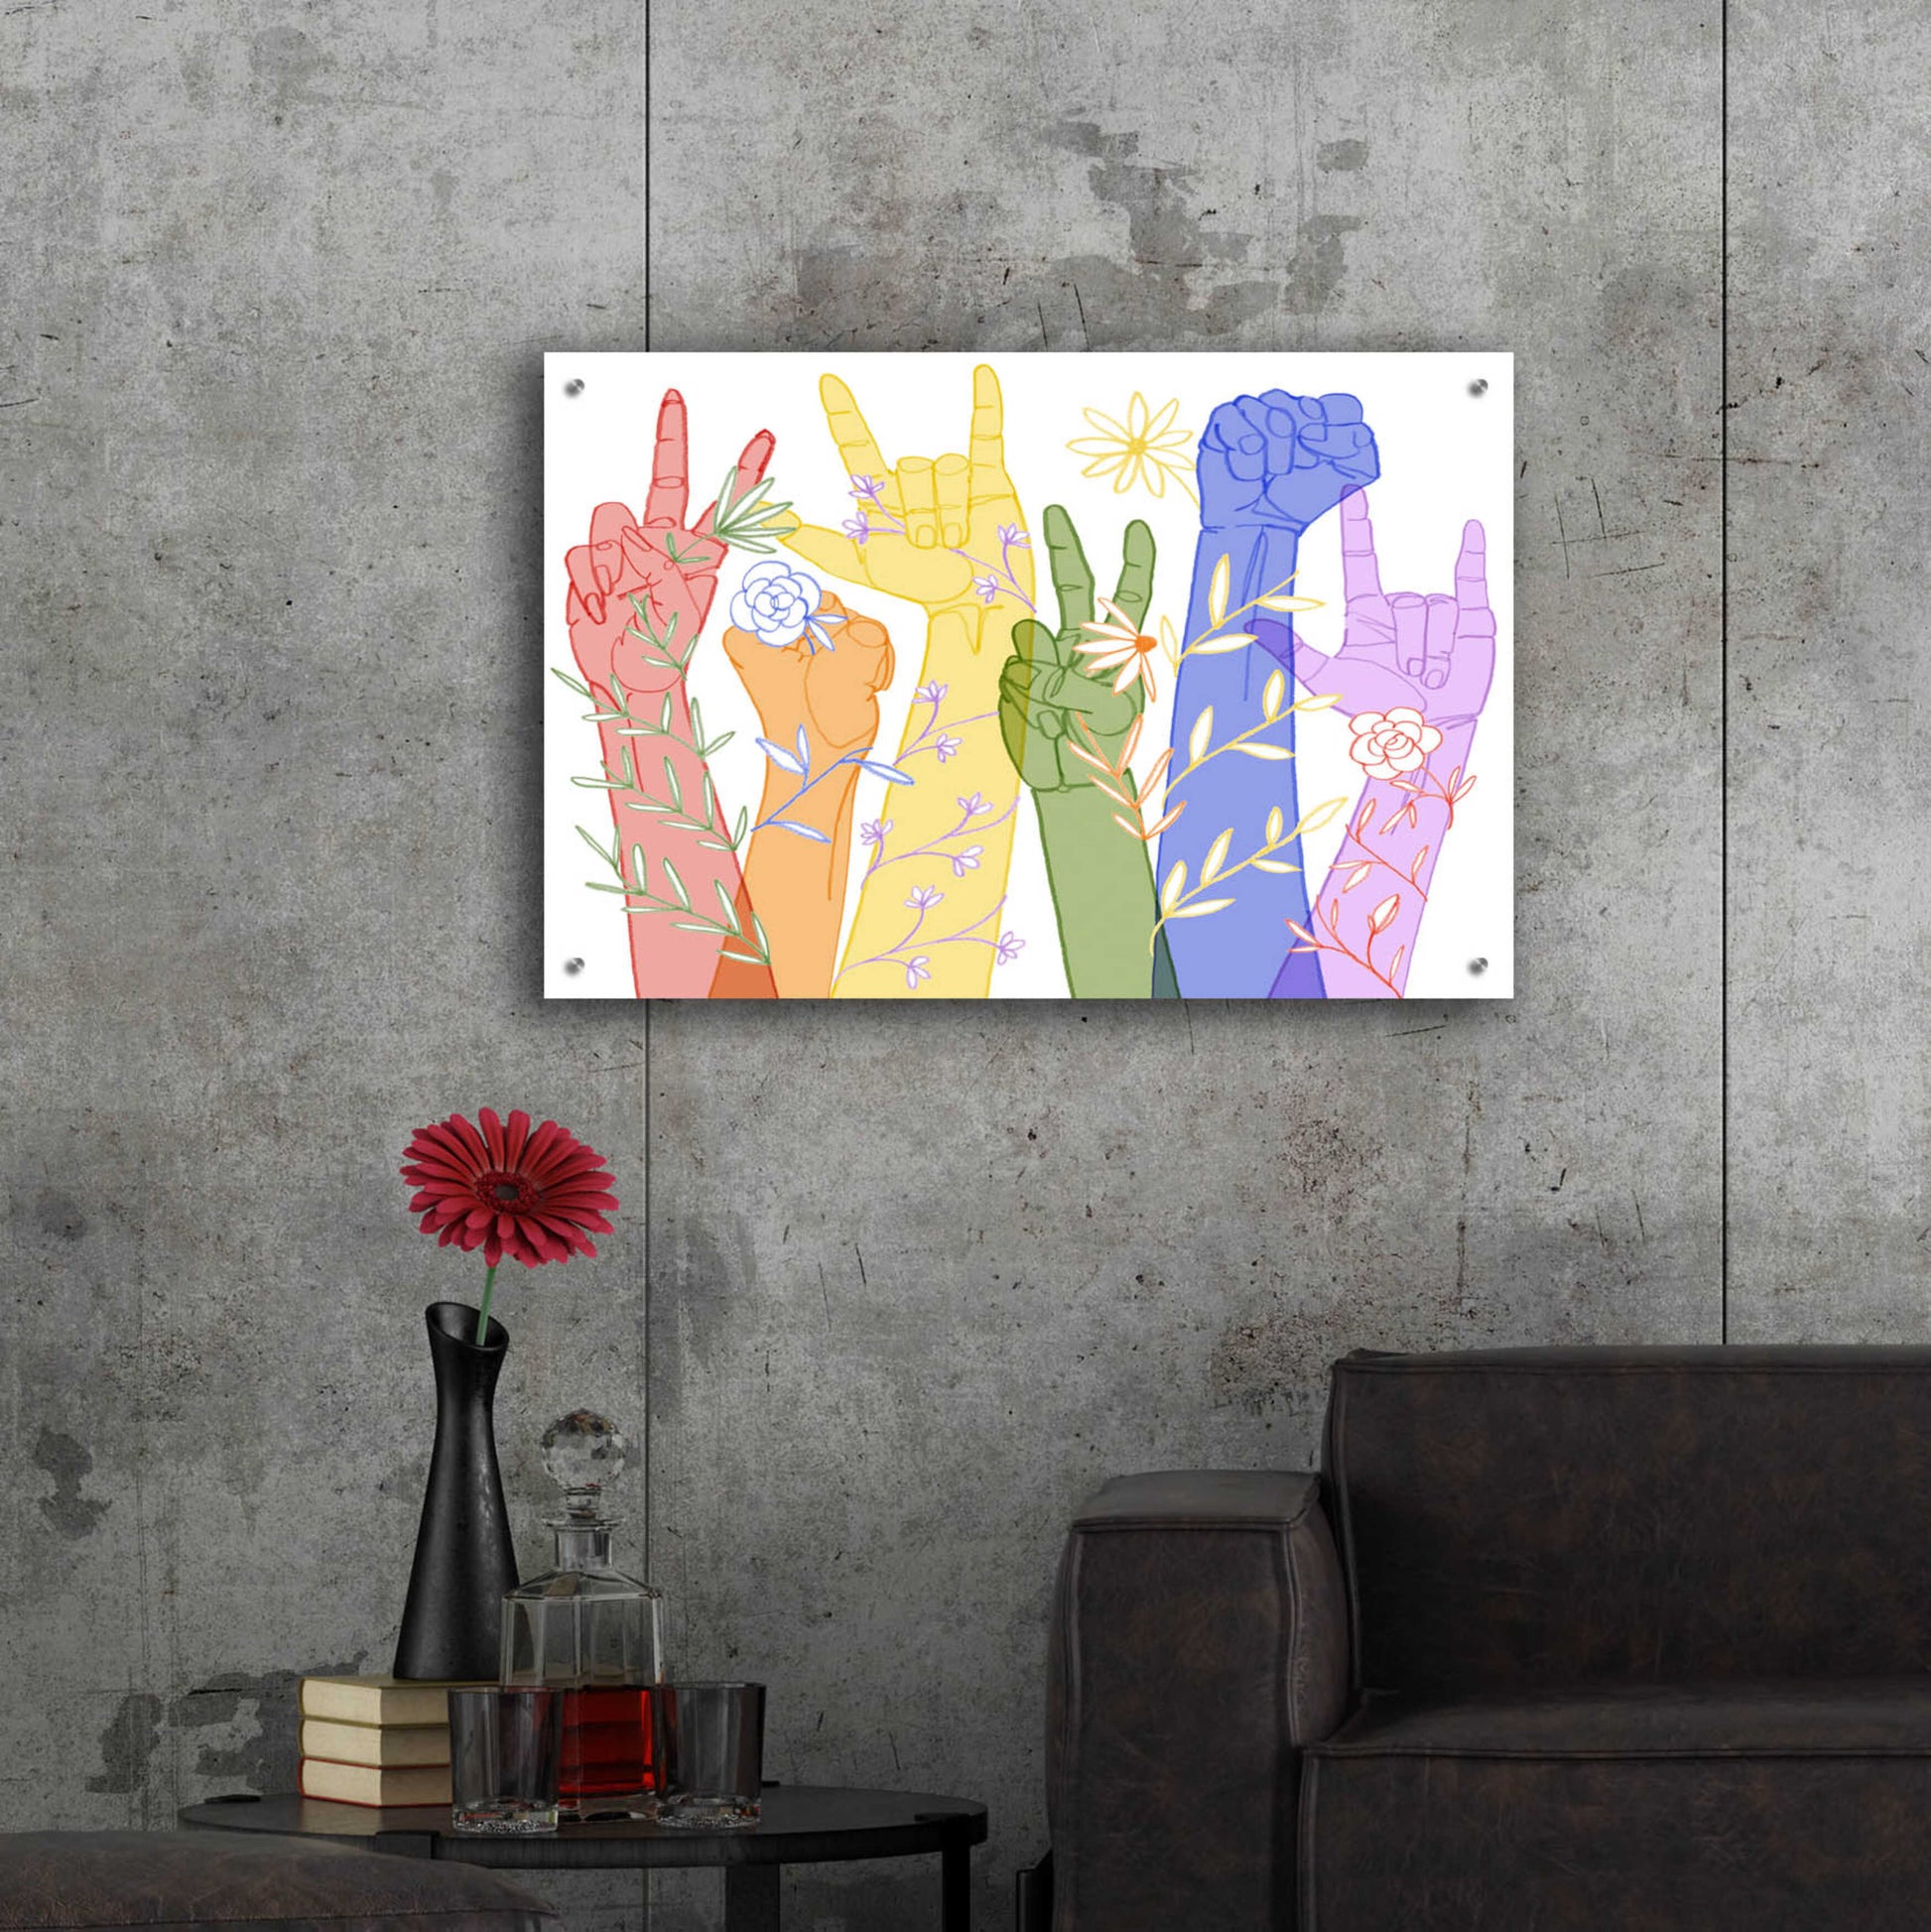 Epic Art 'Love Each Other Collection A' by Grace Popp, Acrylic Glass Wall Art,36x24